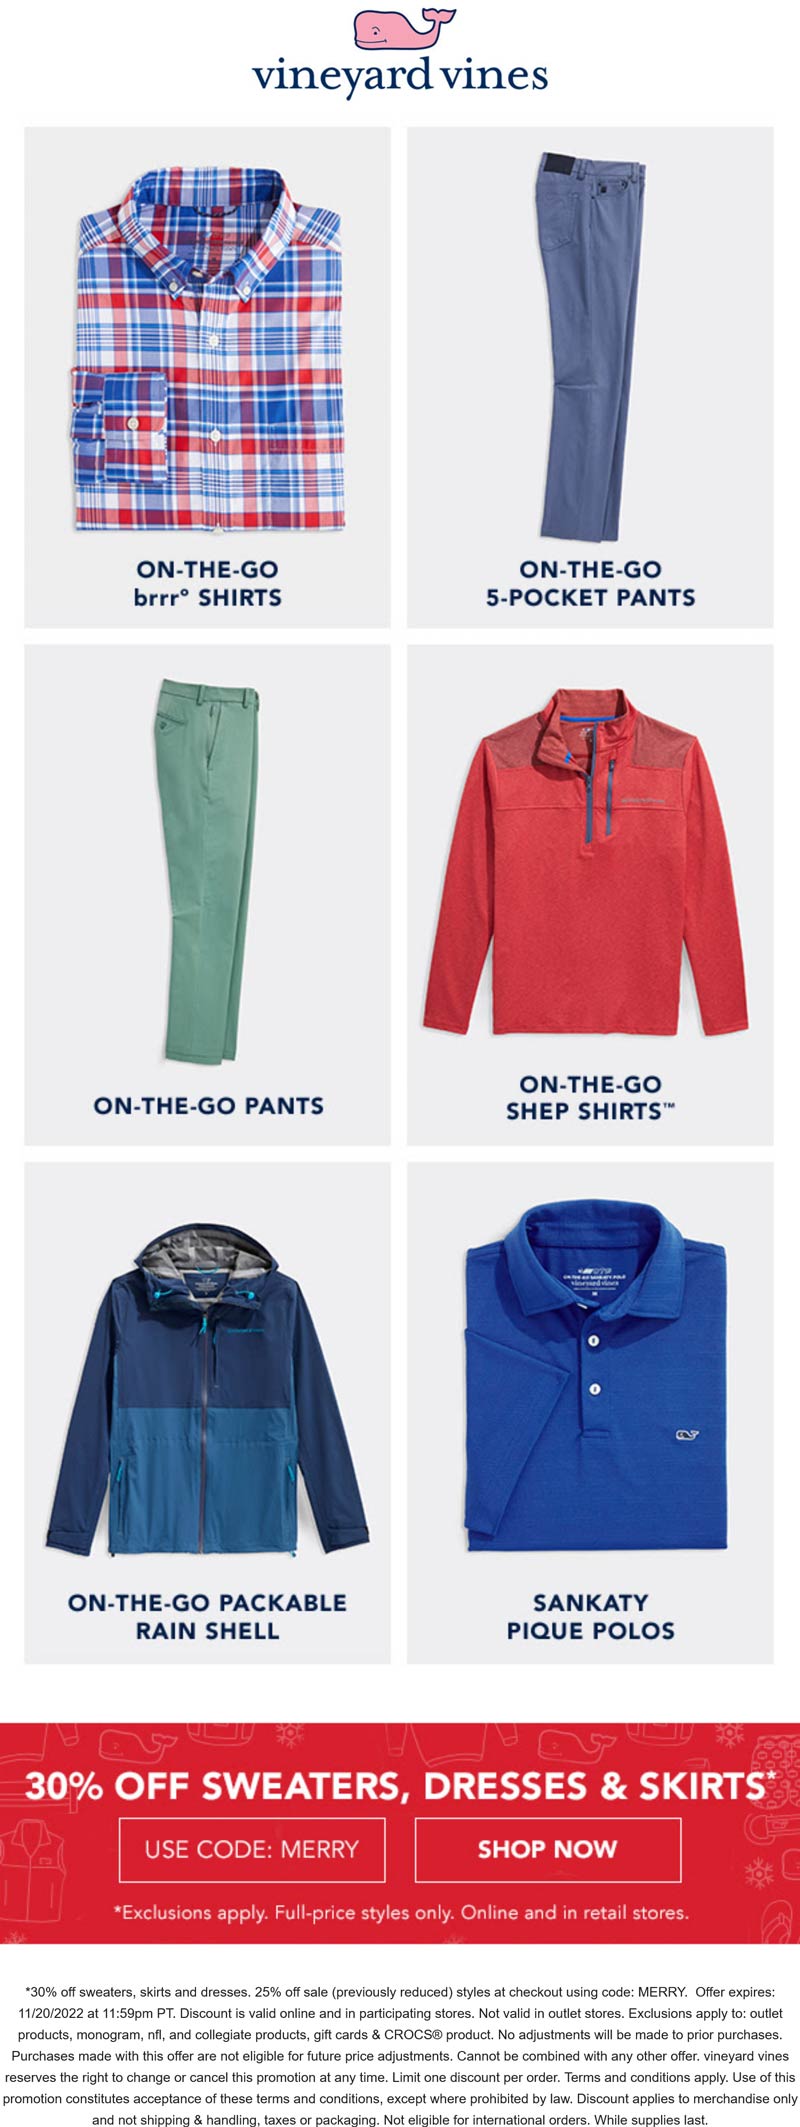 Vineyard Vines stores Coupon  25% off sale items & 30% off sweaters, skirts and dresses at Vineyard Vines, or online via promo code MERRY #vineyardvines 